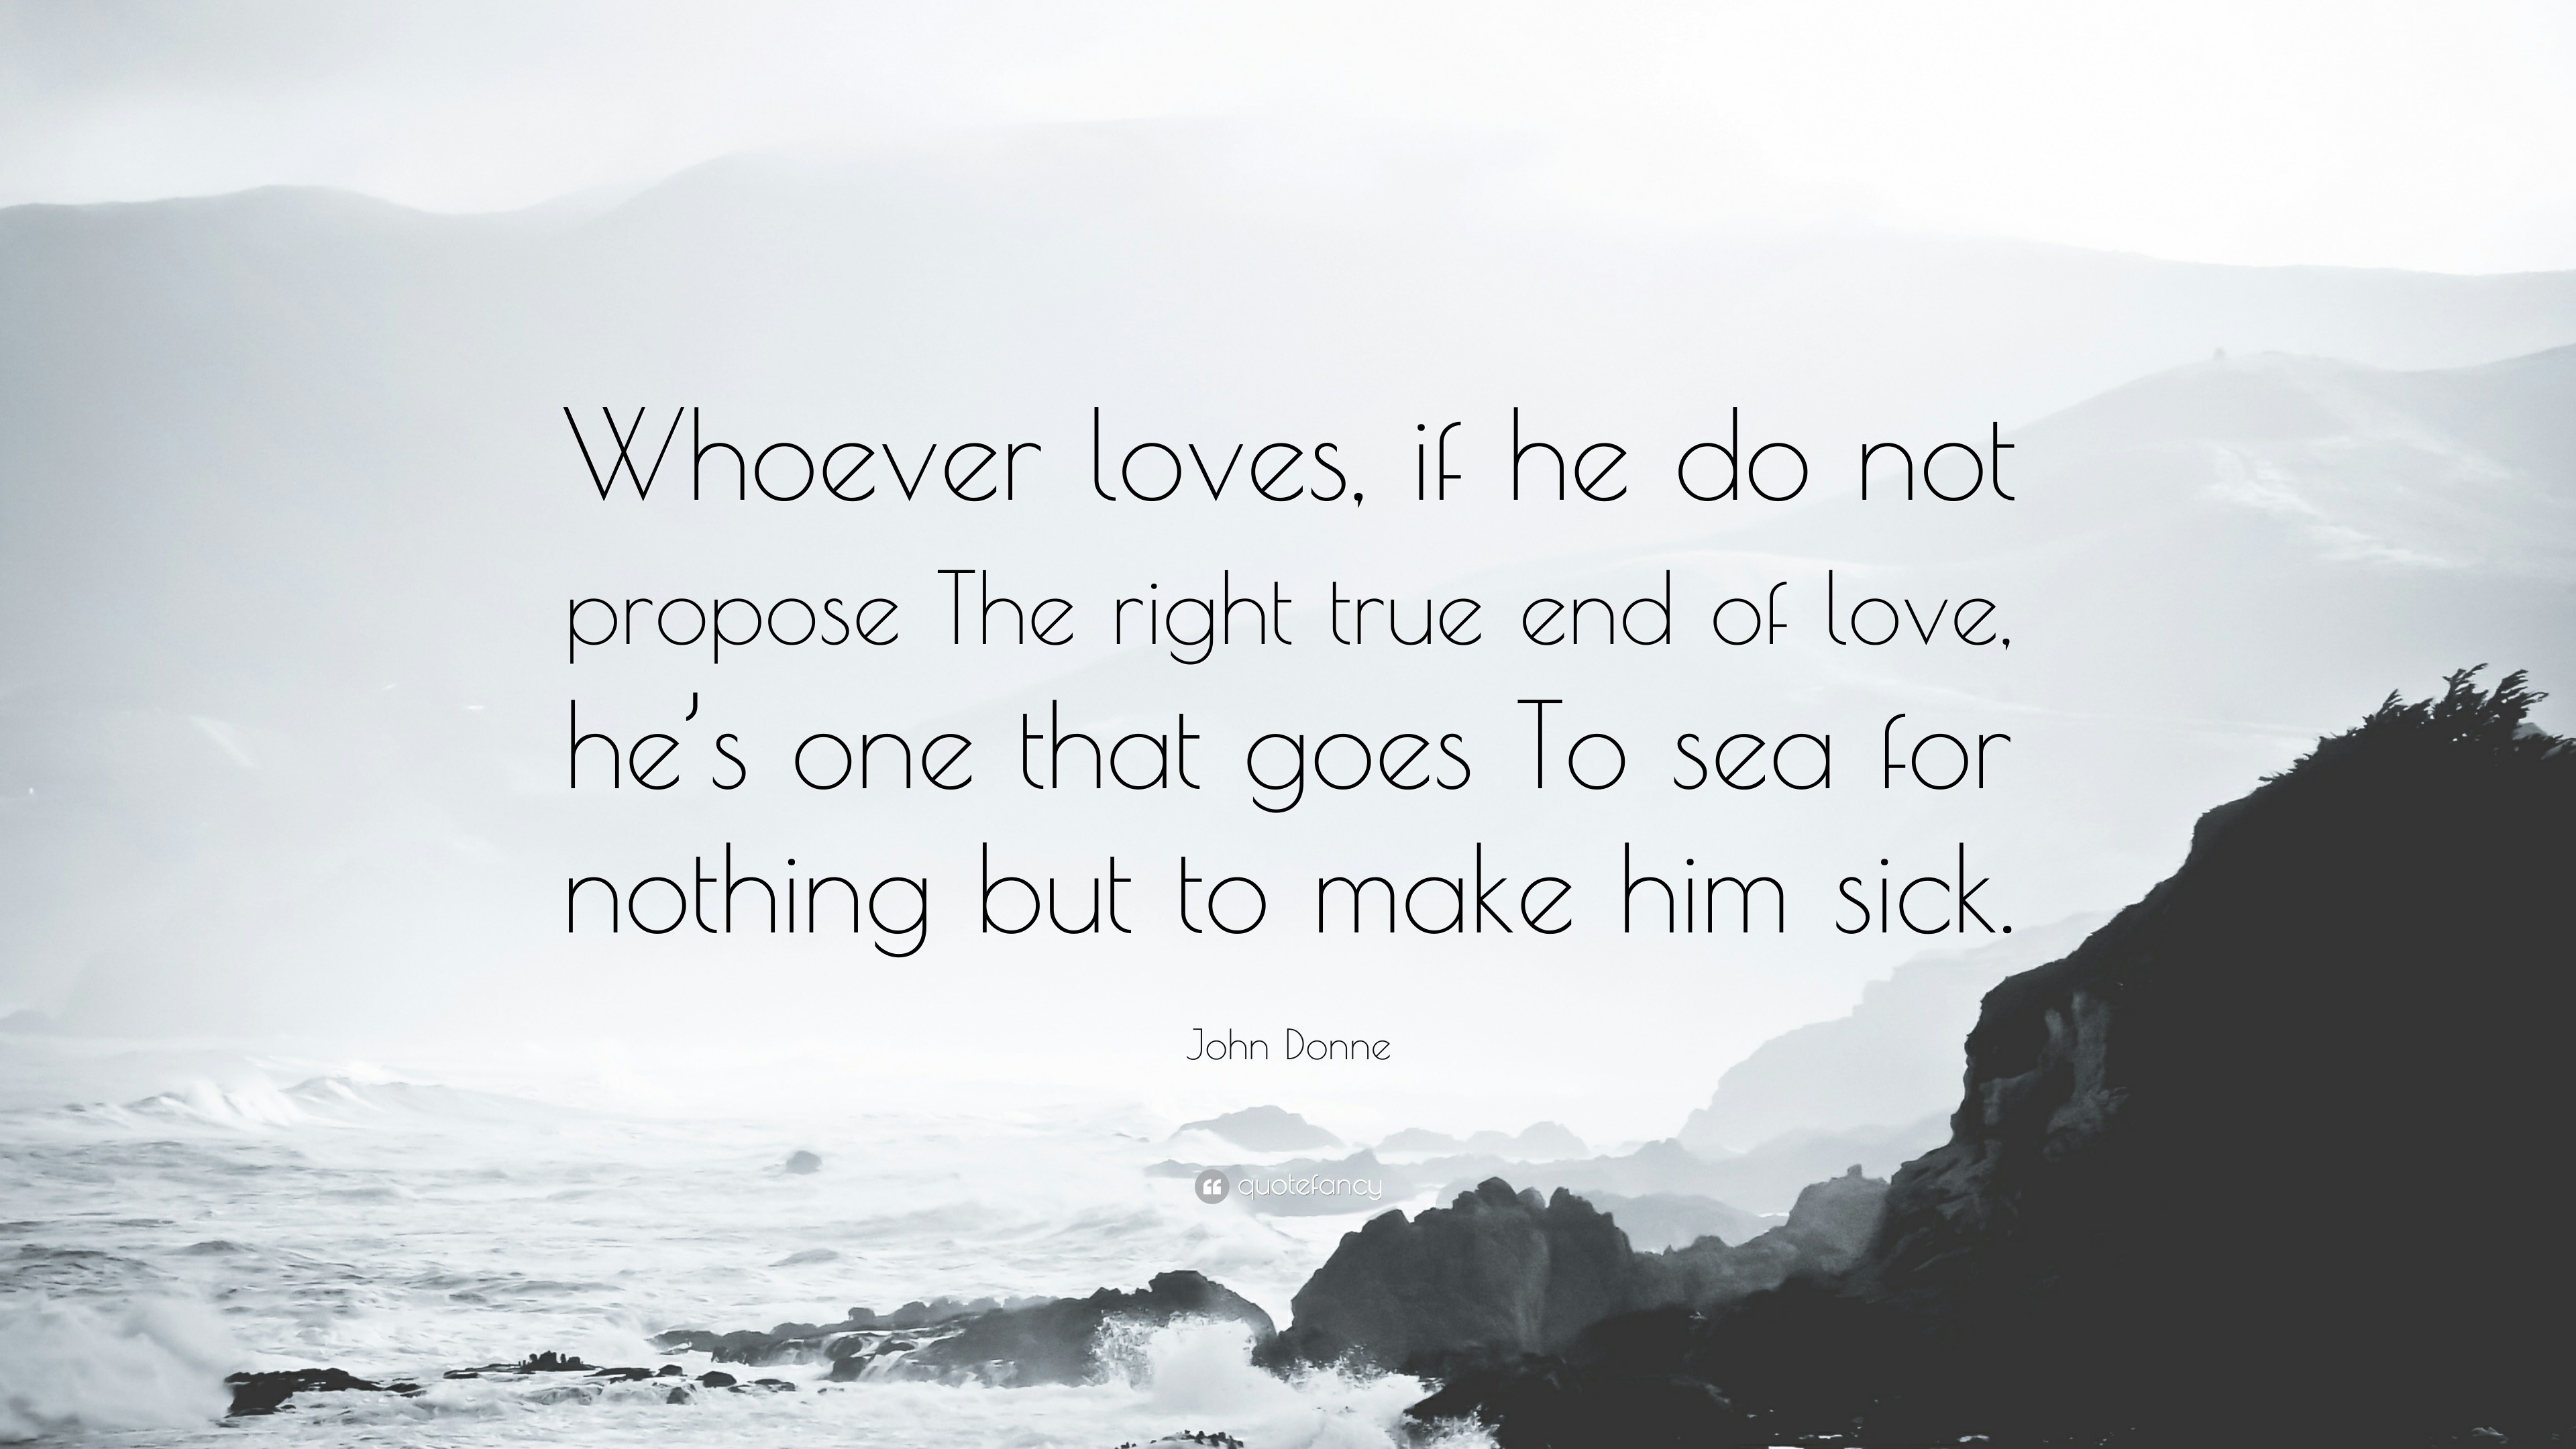 John Donne Quote: “Whoever loves, if he do not propose The right true ...